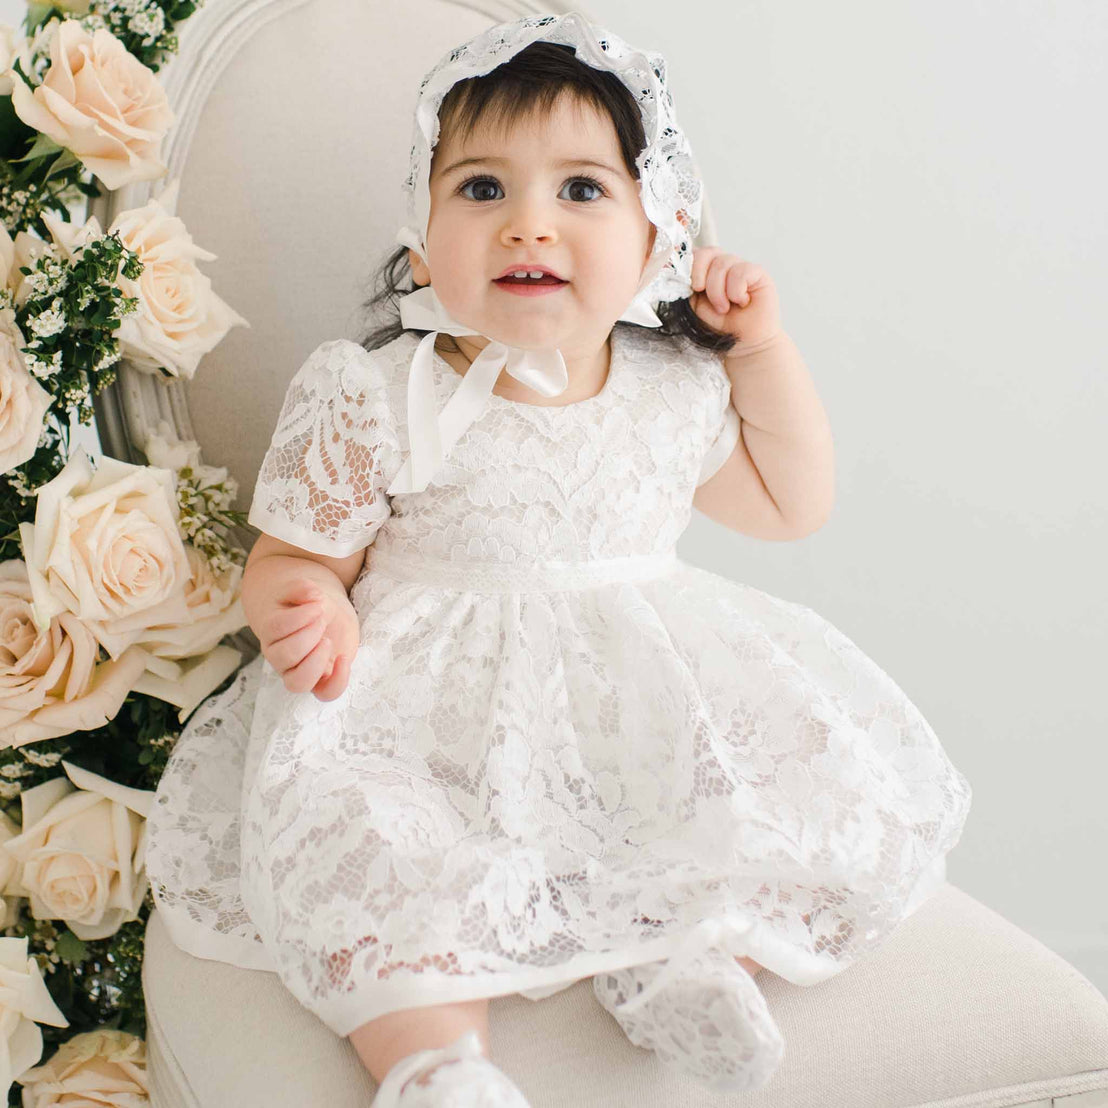 A young child wearing a white lace Rose Romper Dress and bonnet sits on a cream chair, surrounded by pink roses, looking upward with a joyful expression at their baptism.